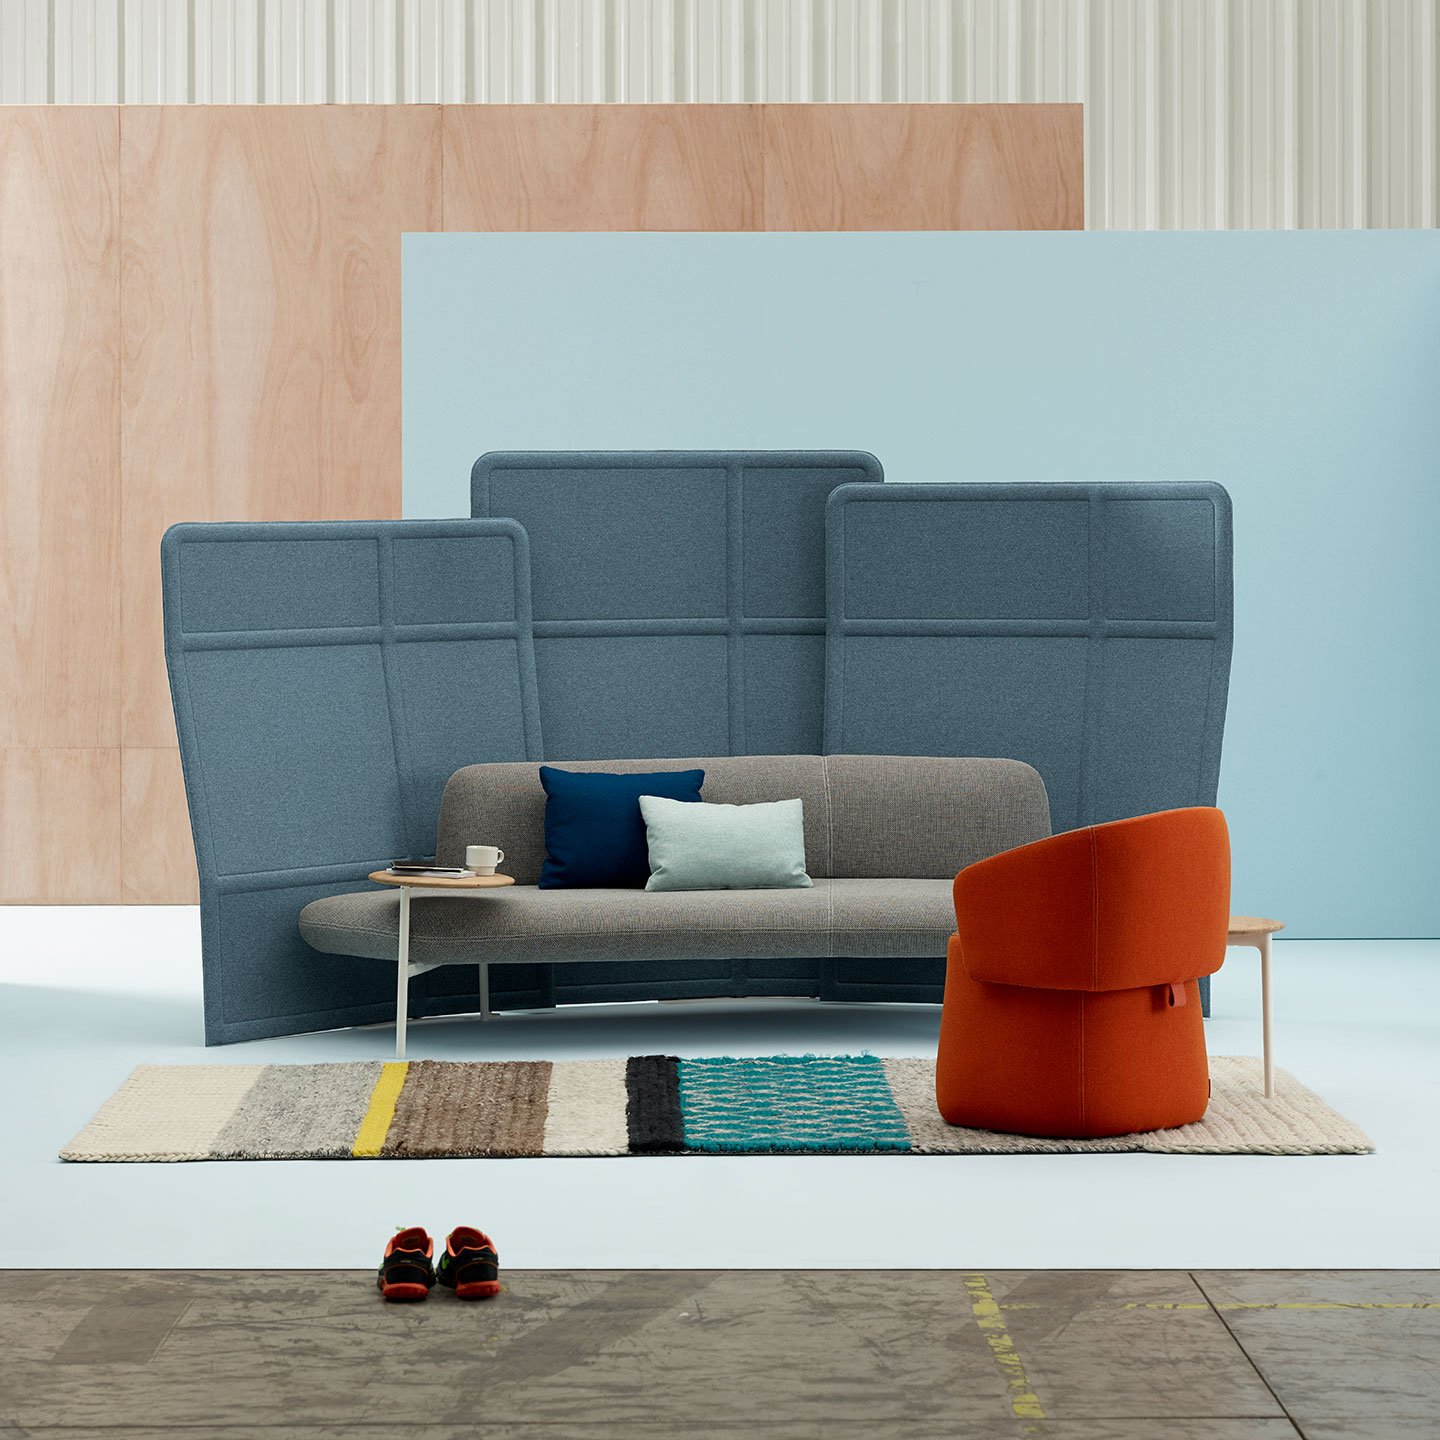 Haworth Openest Plume Screen in blue color above grey couch in orange chair in open space